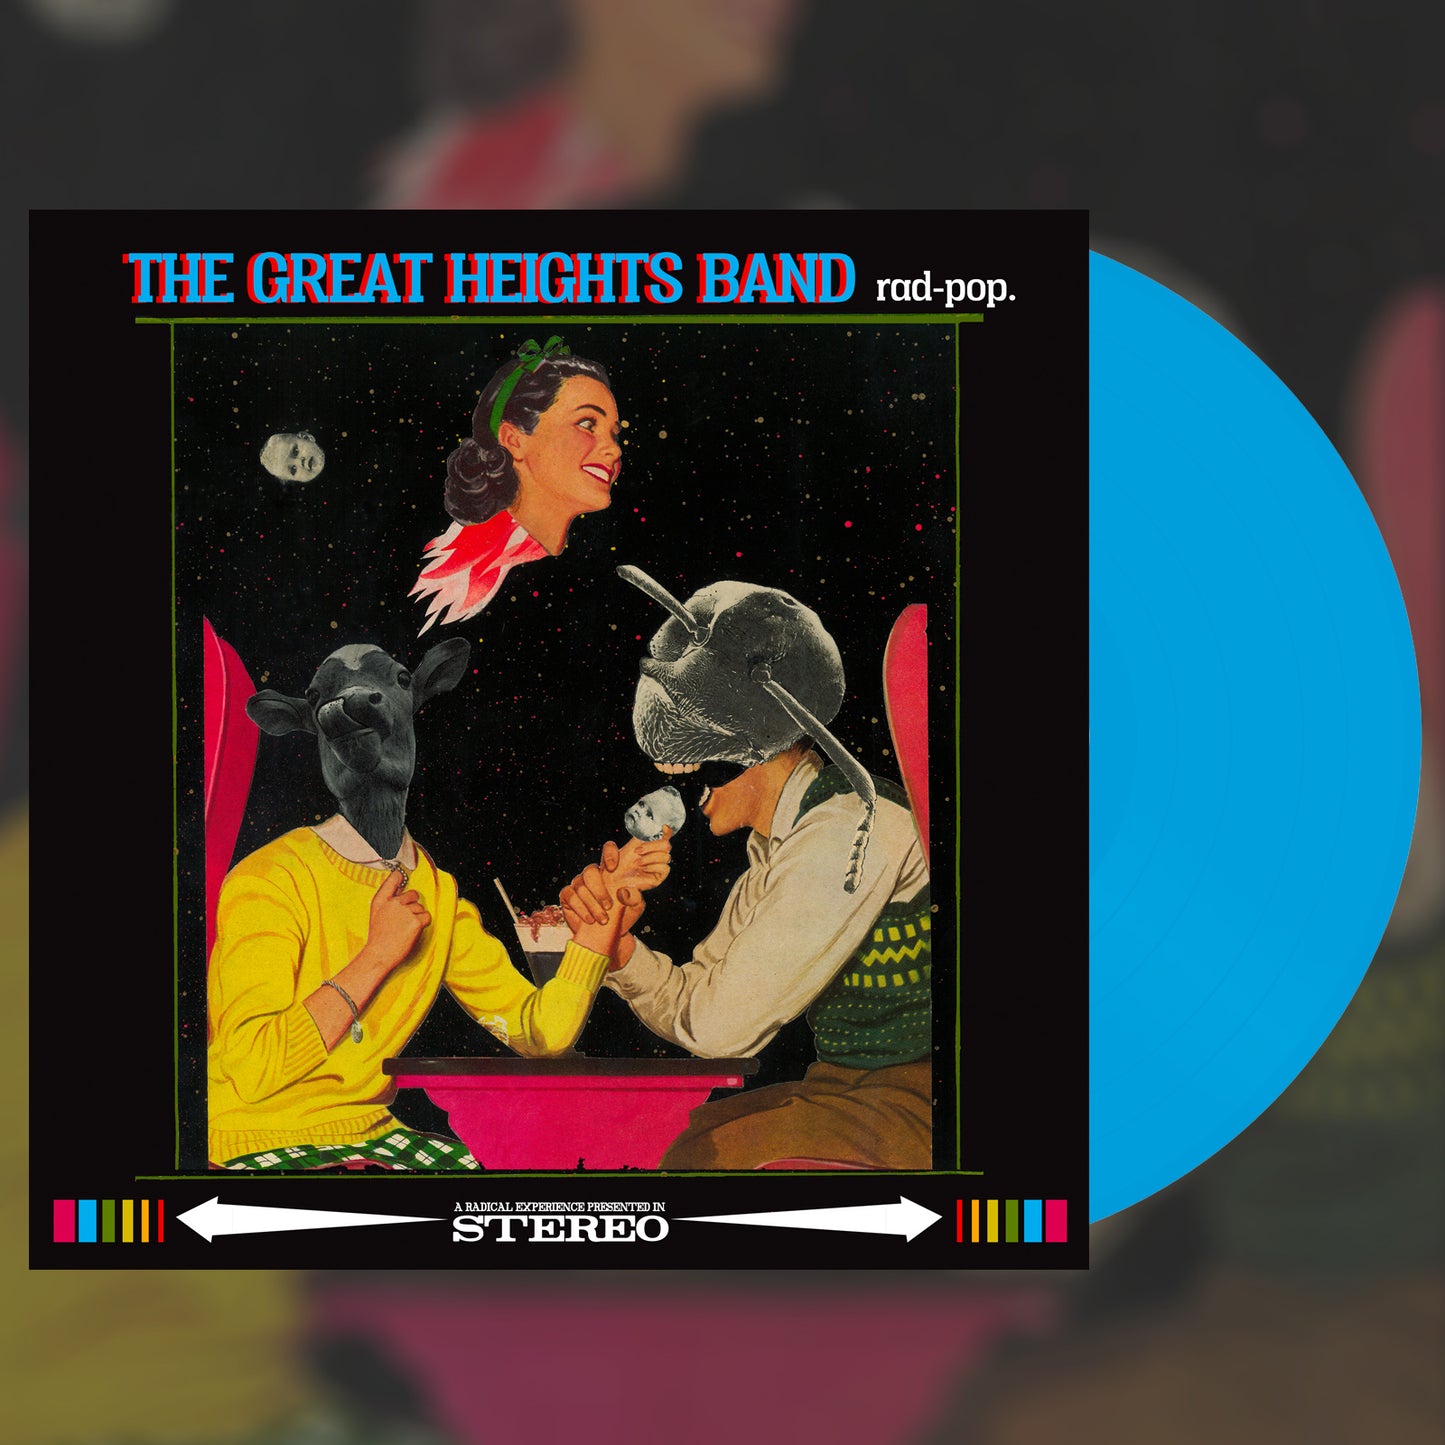 The Great Heights Band 'rad-pop' LP